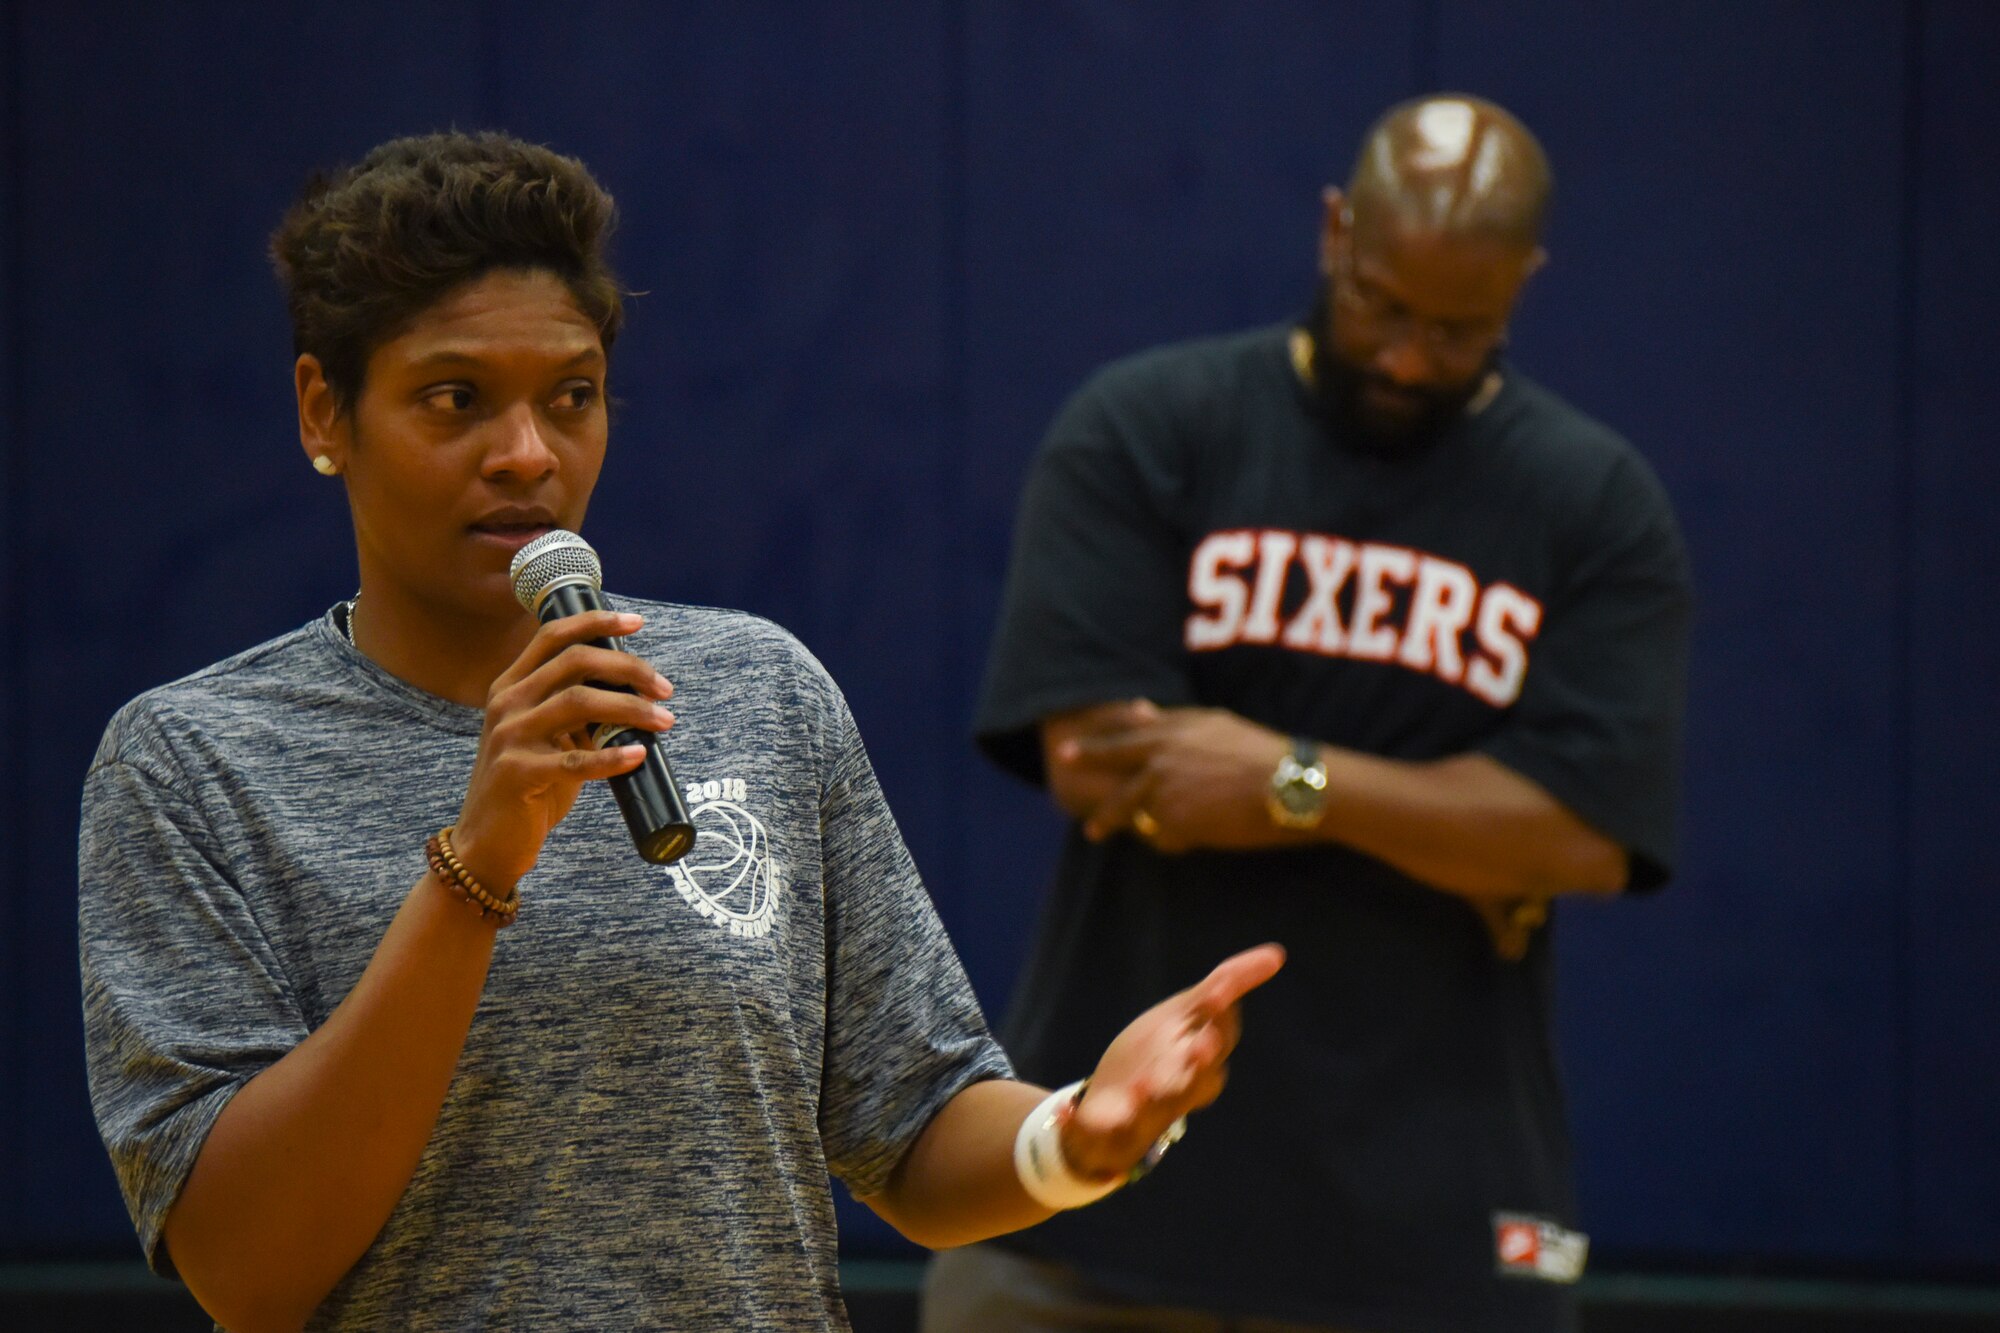 2017 NCAA Women’s Final Four Ambassador, Alicia Thompson speaks during the 3-on-3 tournament at the Mathis Fitness Center on Goodfellow Air Force Base, Texas, March 24, 2018. Thompson spoke on the importance of resiliency and spoke on what helped her come back from being told she would never be able to play basketball after tearing four ligaments in her knee. (U.S. Air Force photo by Airman 1st Class Zachary Chapman/Released)